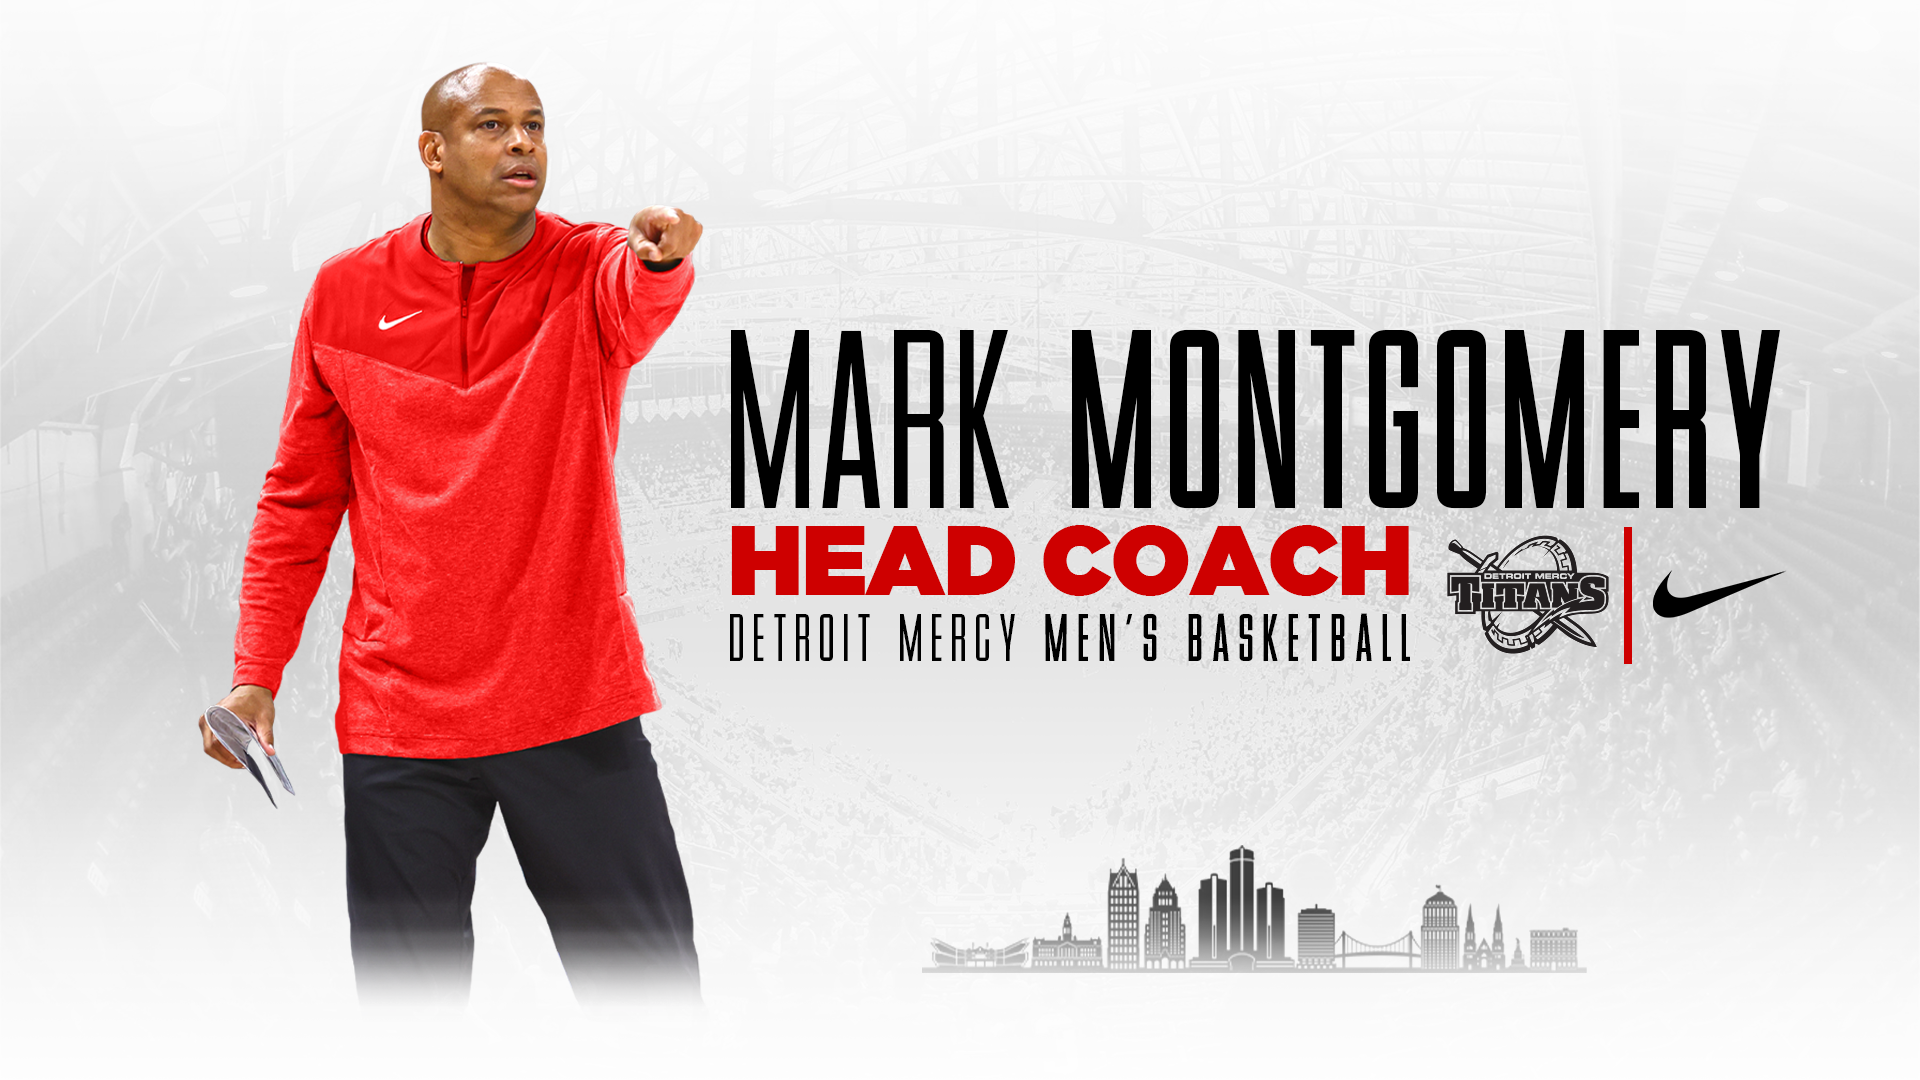 A graphic featuring a photo of Mark Montgomery, with text reading Mark Montgomery, Head Coach, Detroit Mercy Men's Basketball and featuring logos for Detroit Mercy Titans and Nike.